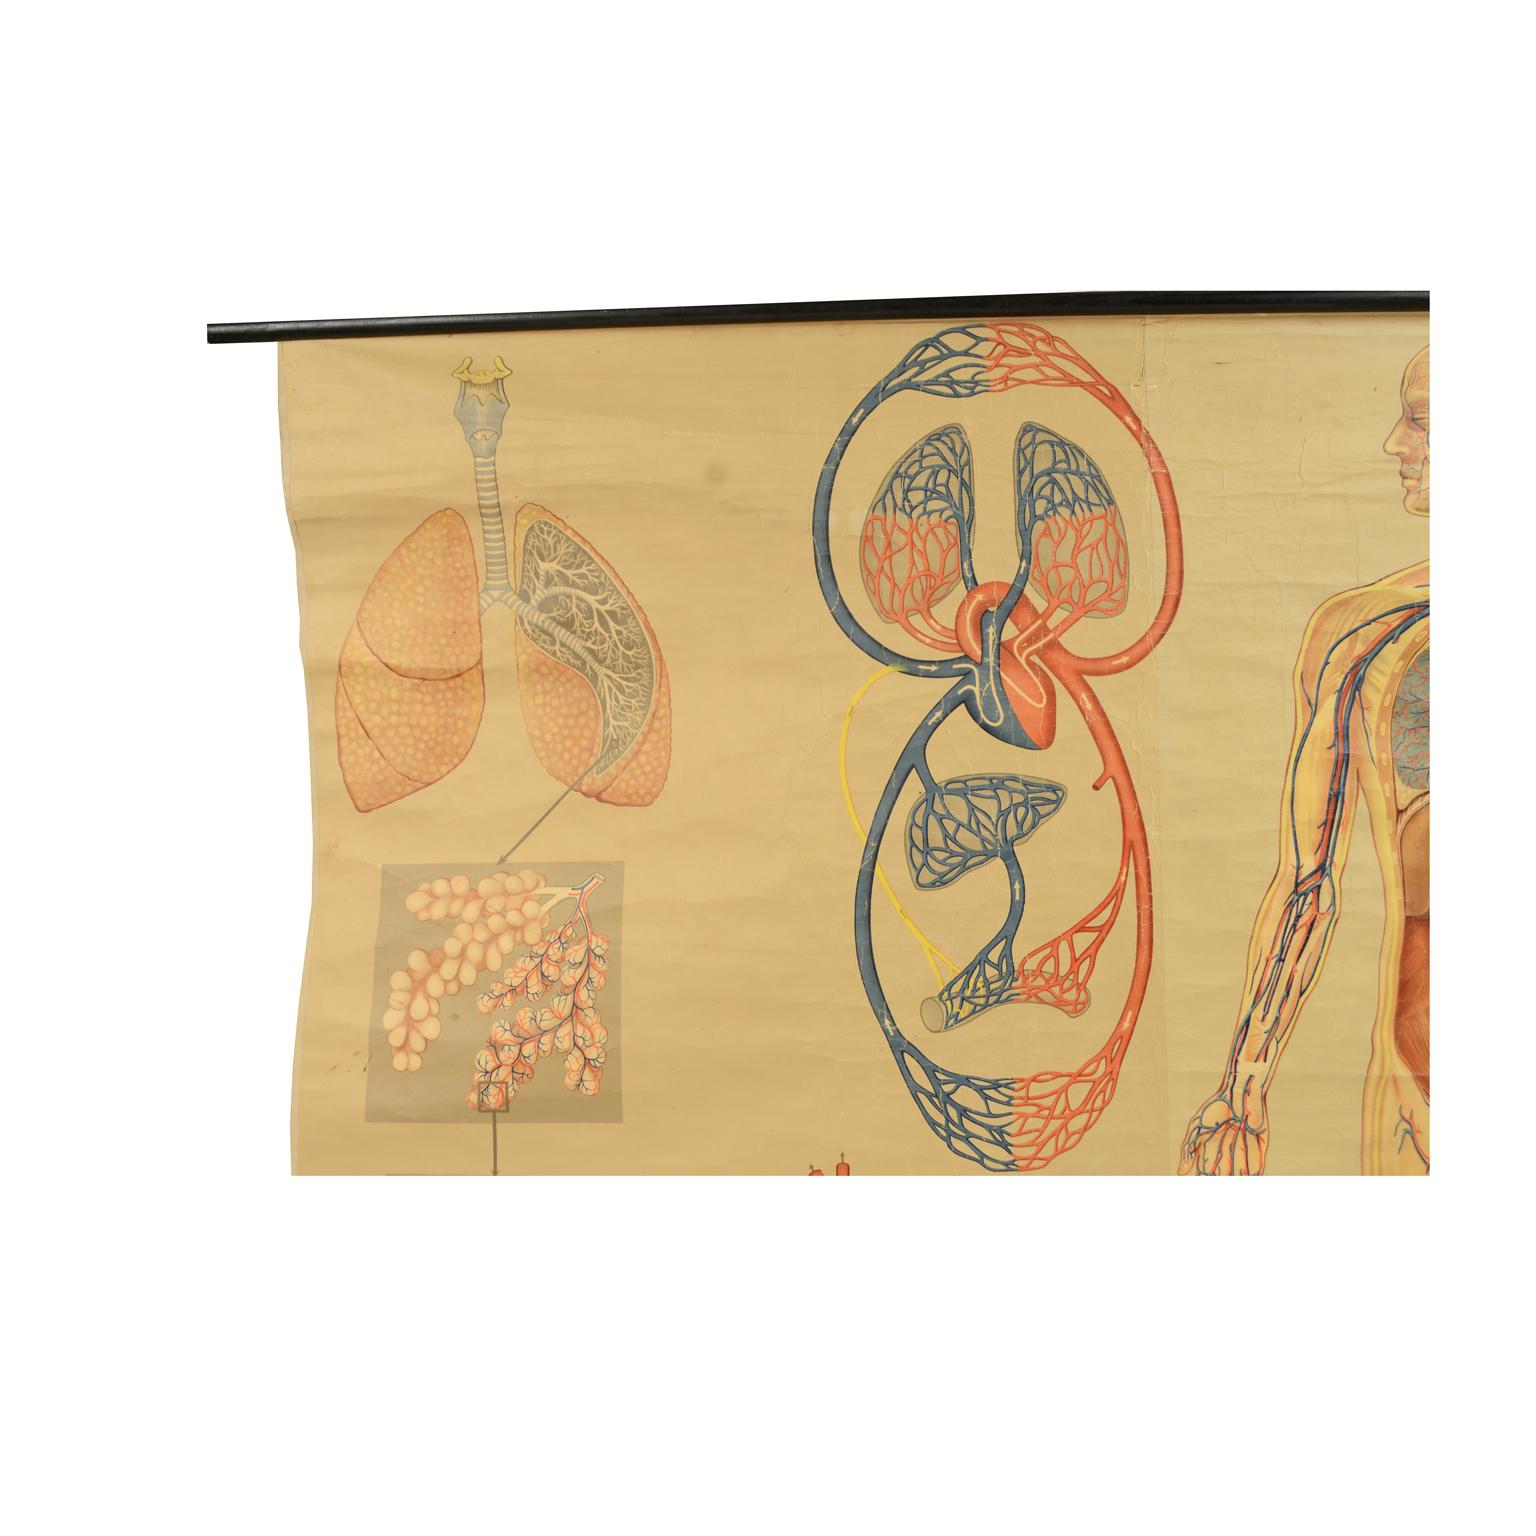 Colored anatomical didactic plate from the 1930s on canvas paper depicting the circulatory and respiratory systems, mounted on two black painted wooden sticks. Signed Lehrmittelverlag Hagemann, Düsseldorf, a company founded in 1929 and still